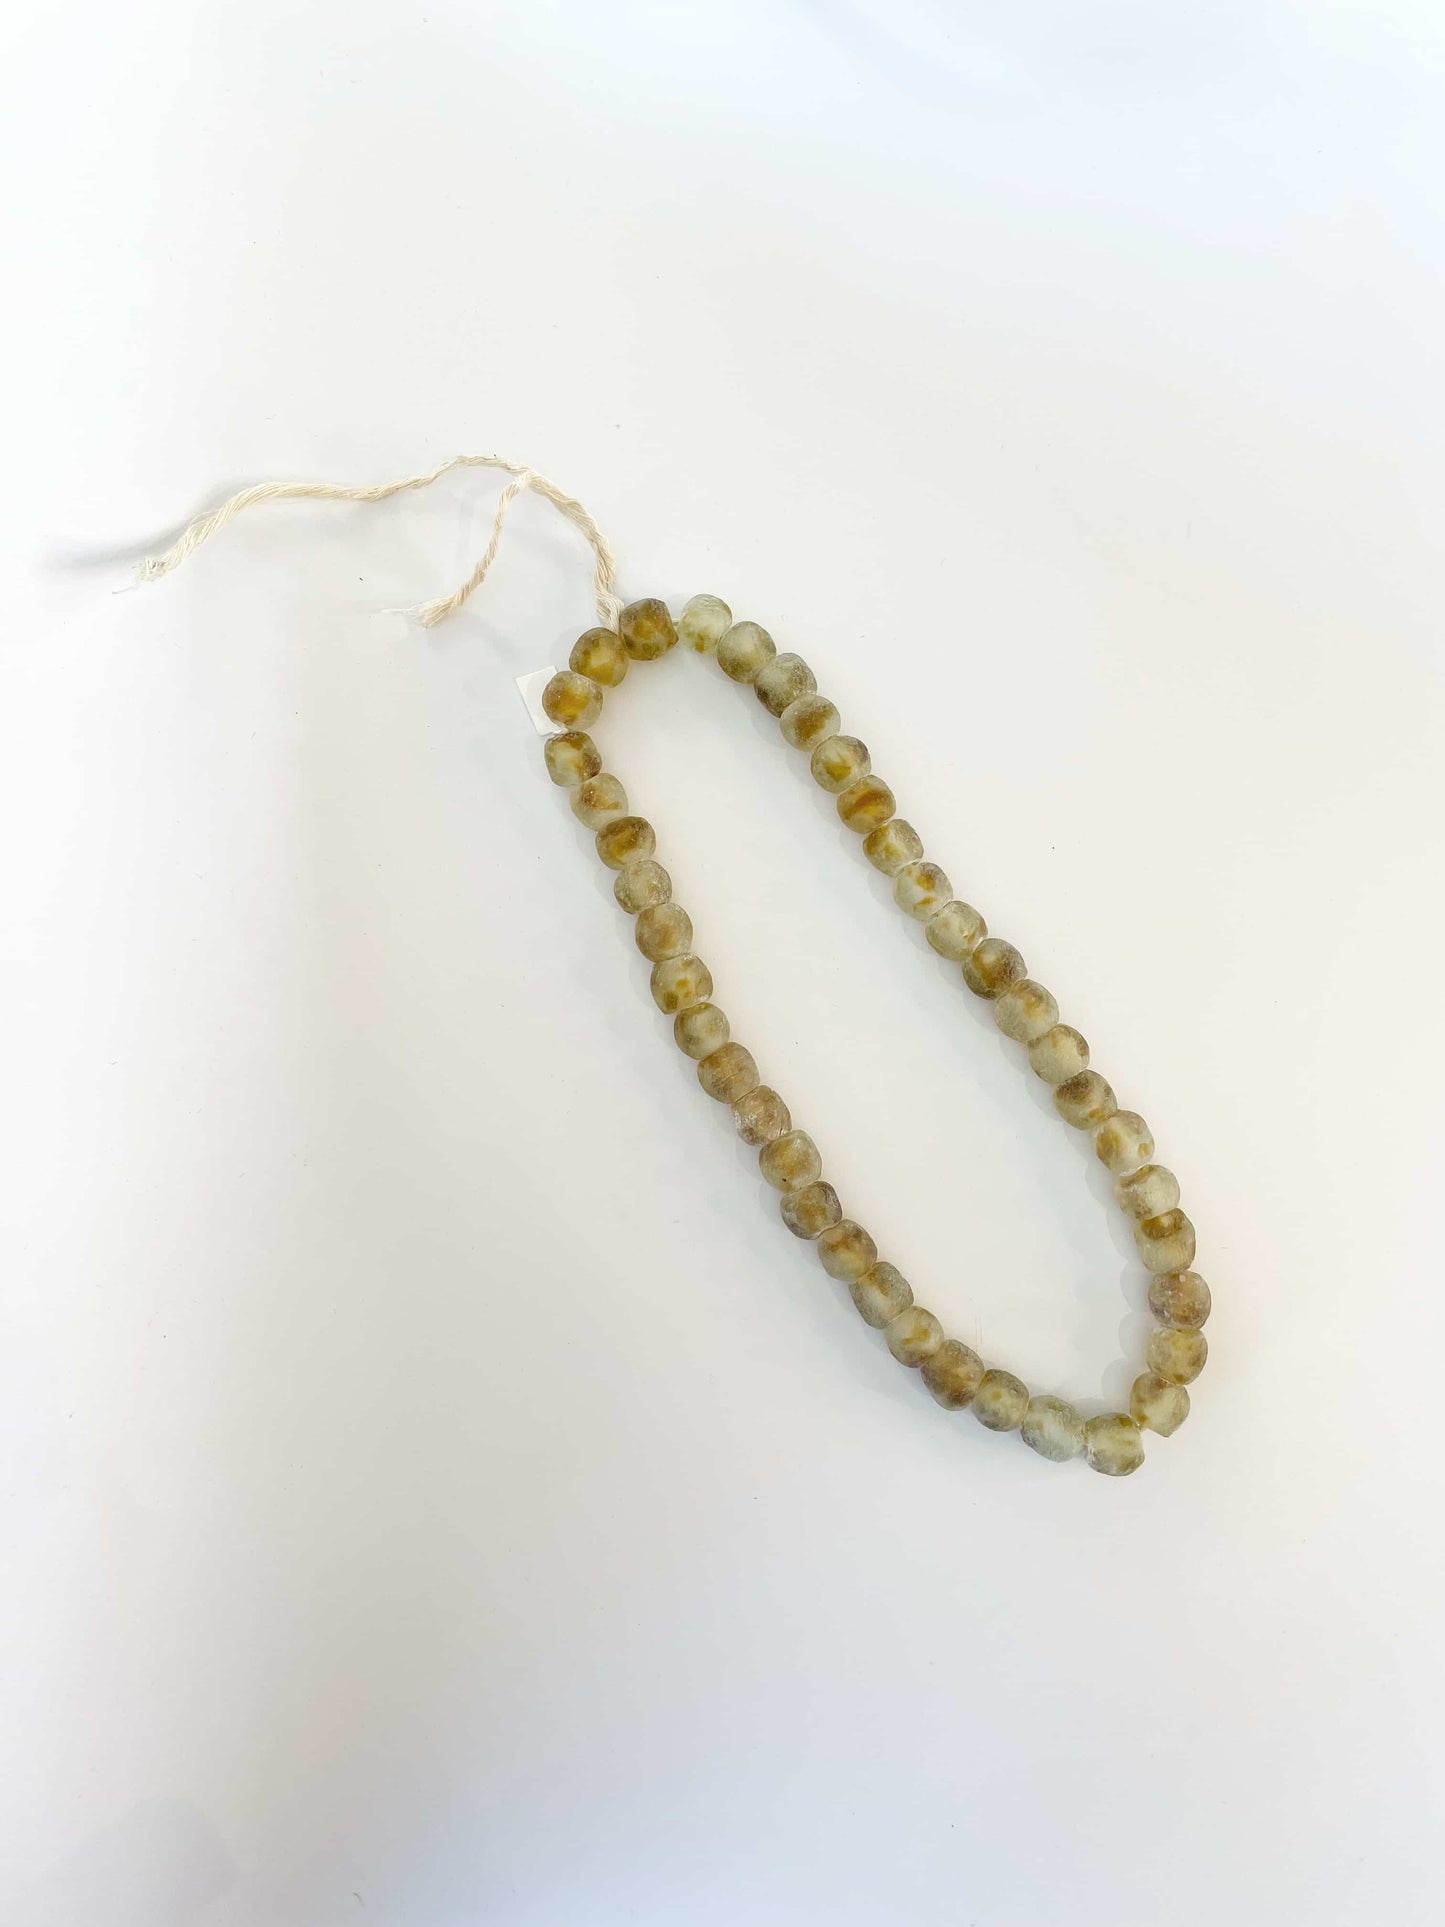 Recycled glass beads in ochre